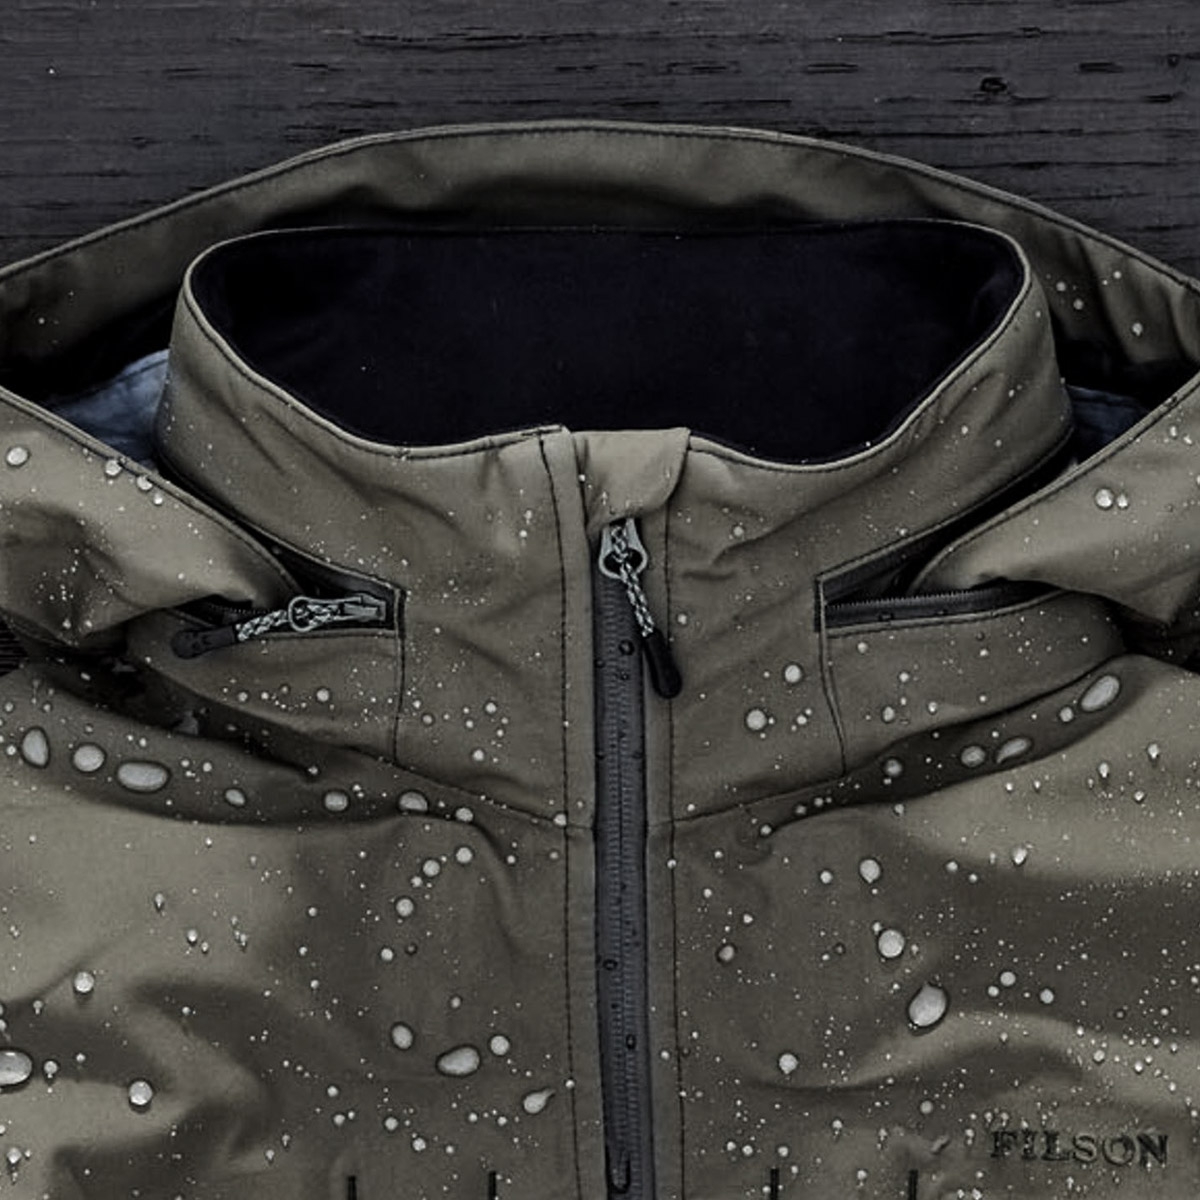 Filson Neoshell Reliance Jacket Raven, waterproof and highly breathable jacket